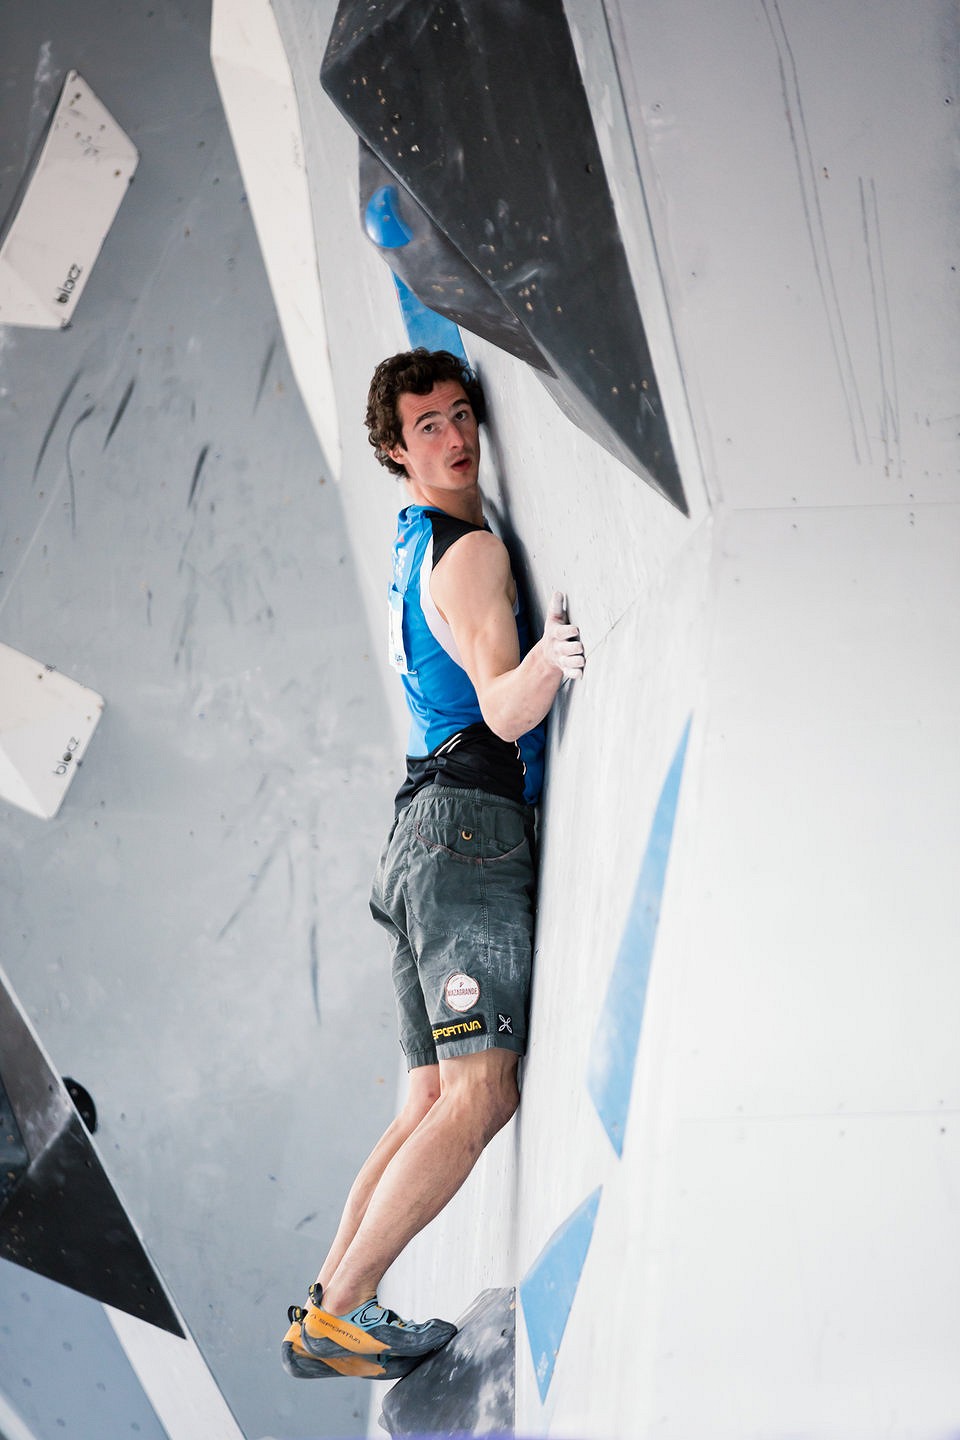 Adam Ondra set his sights on the overall win, but came just 5 points short.  © Dark Sky Media